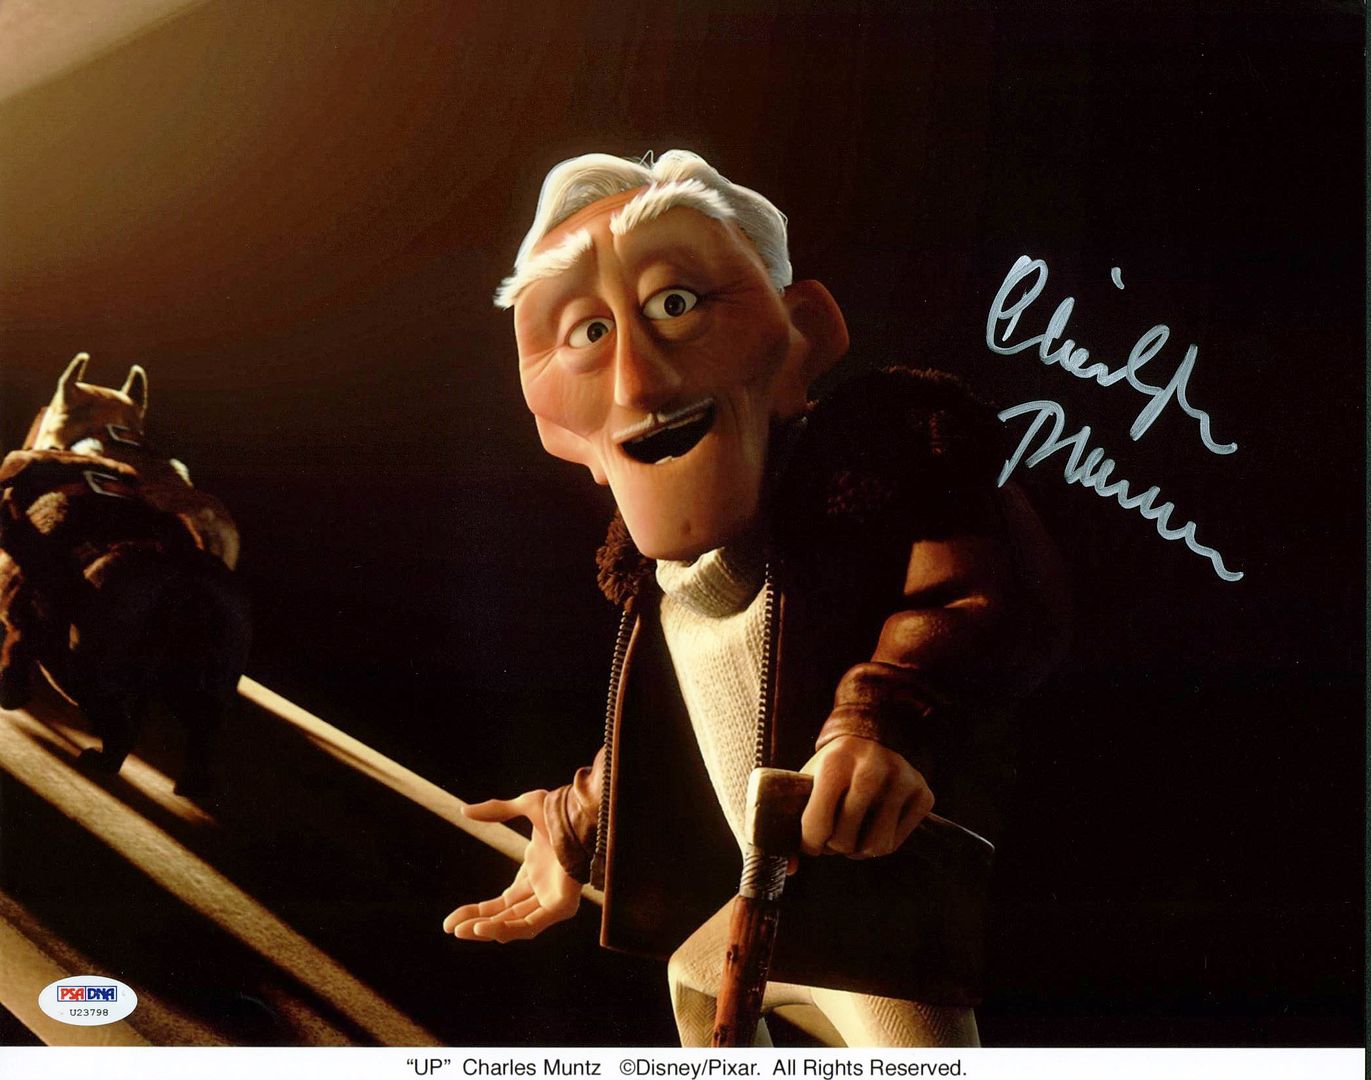 Press Pass Collectibles CHRISTOPHER PLUMMER UP SIGNED AUTHENTIC 11X14 PHOTO AUTOGRAPHED PSA/DNA #U23798